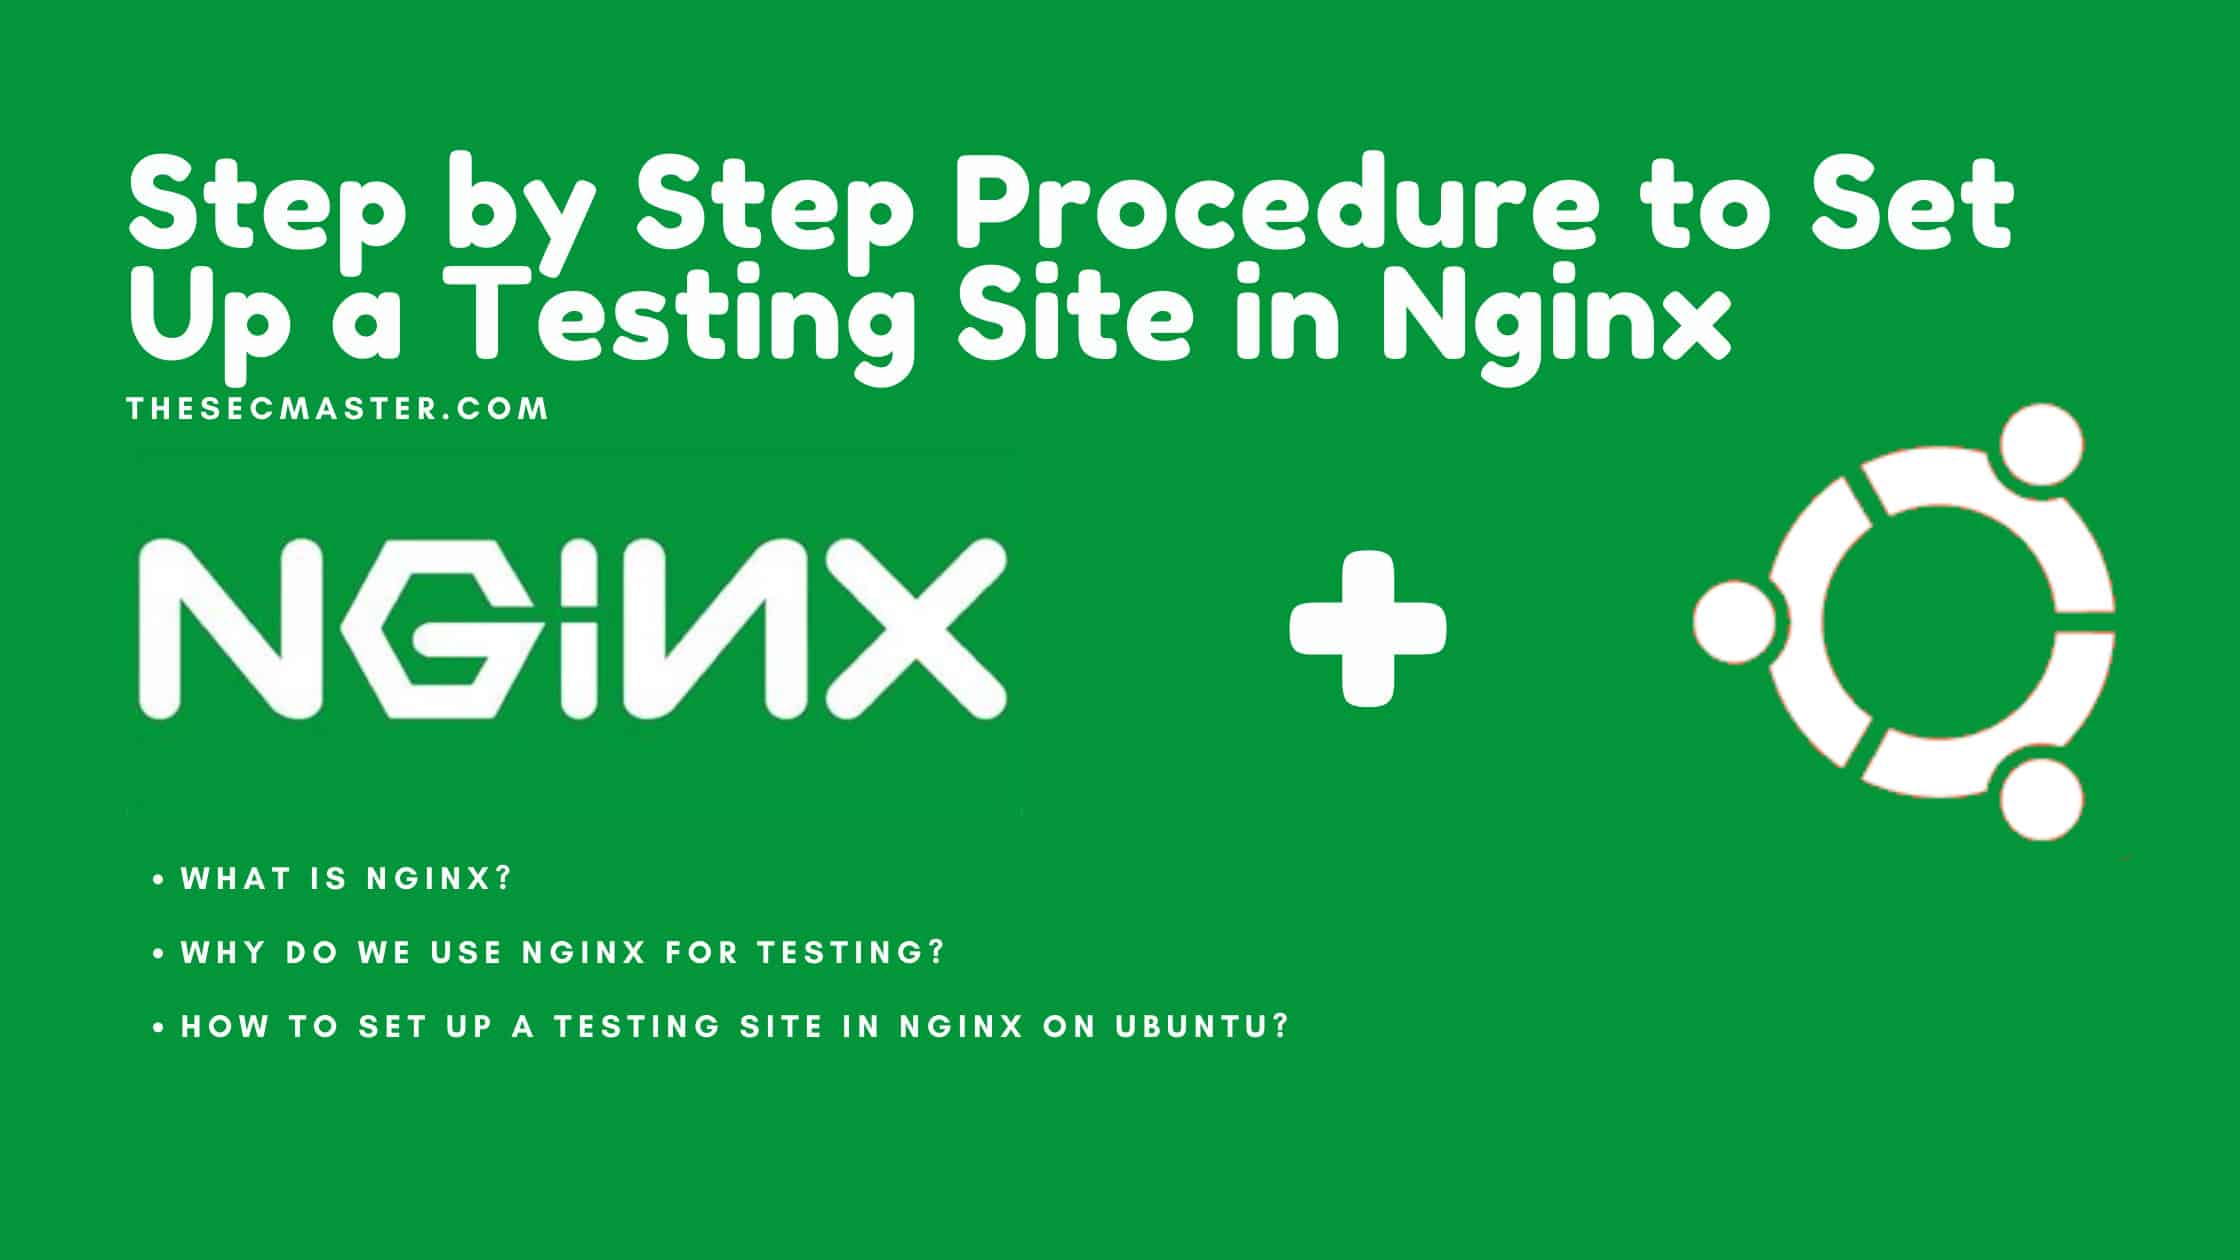 Step By Step Procedure To Set Up A Testing Site In Nginx